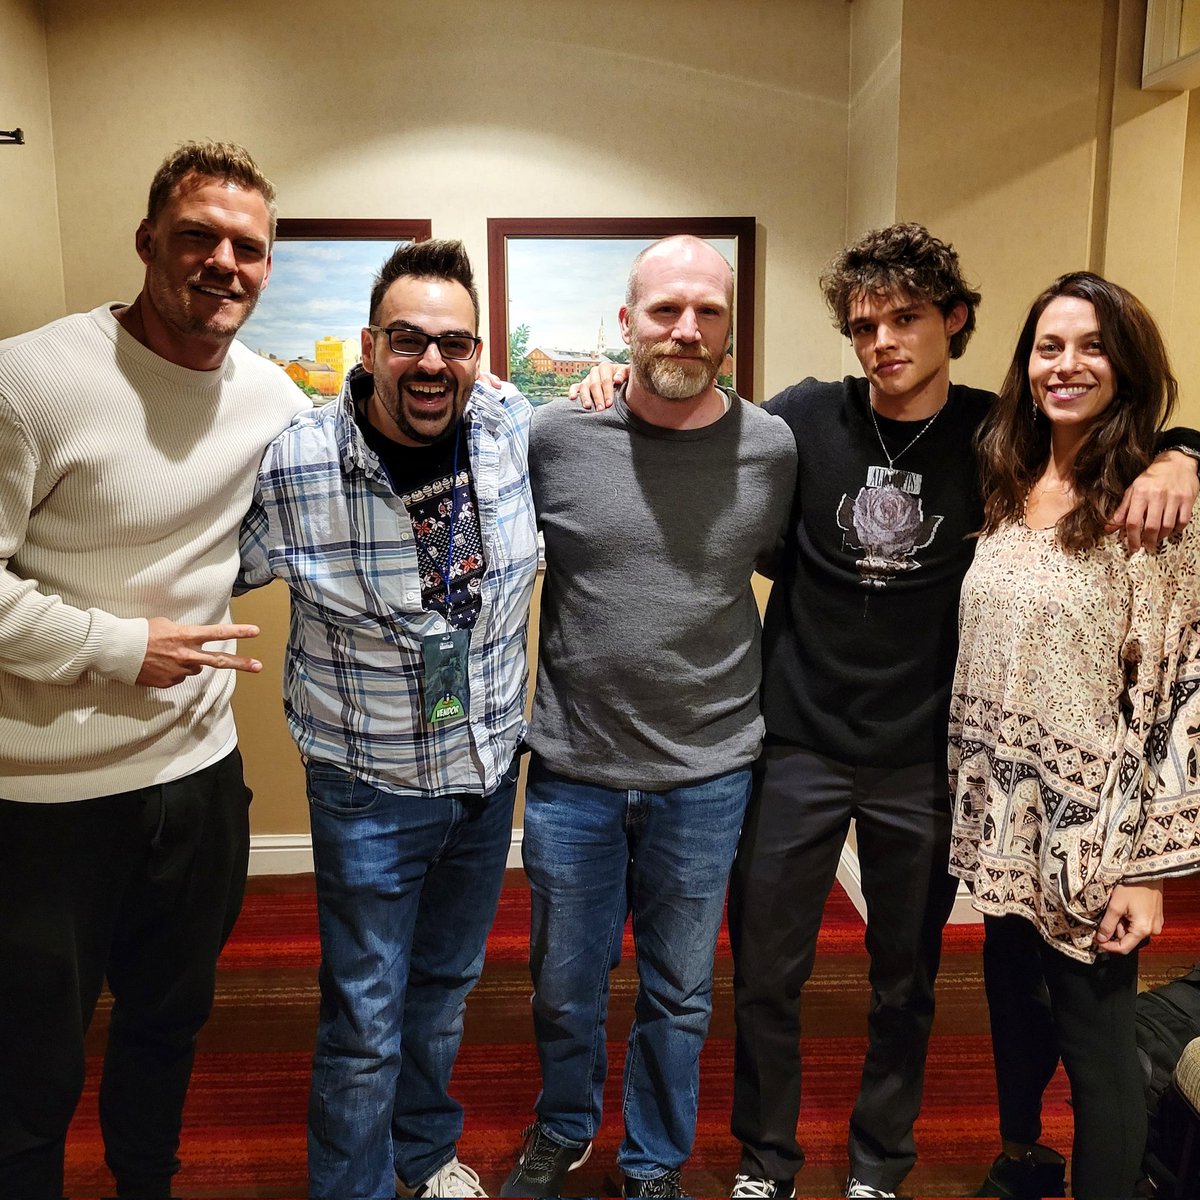 Great time moderating the @DCTitans panel at @ricomiccon with @bradrohrer!

Awesome time with #SavannahWelch, @CurranWalters1 and my long lost twin brother @alanritchson!!!